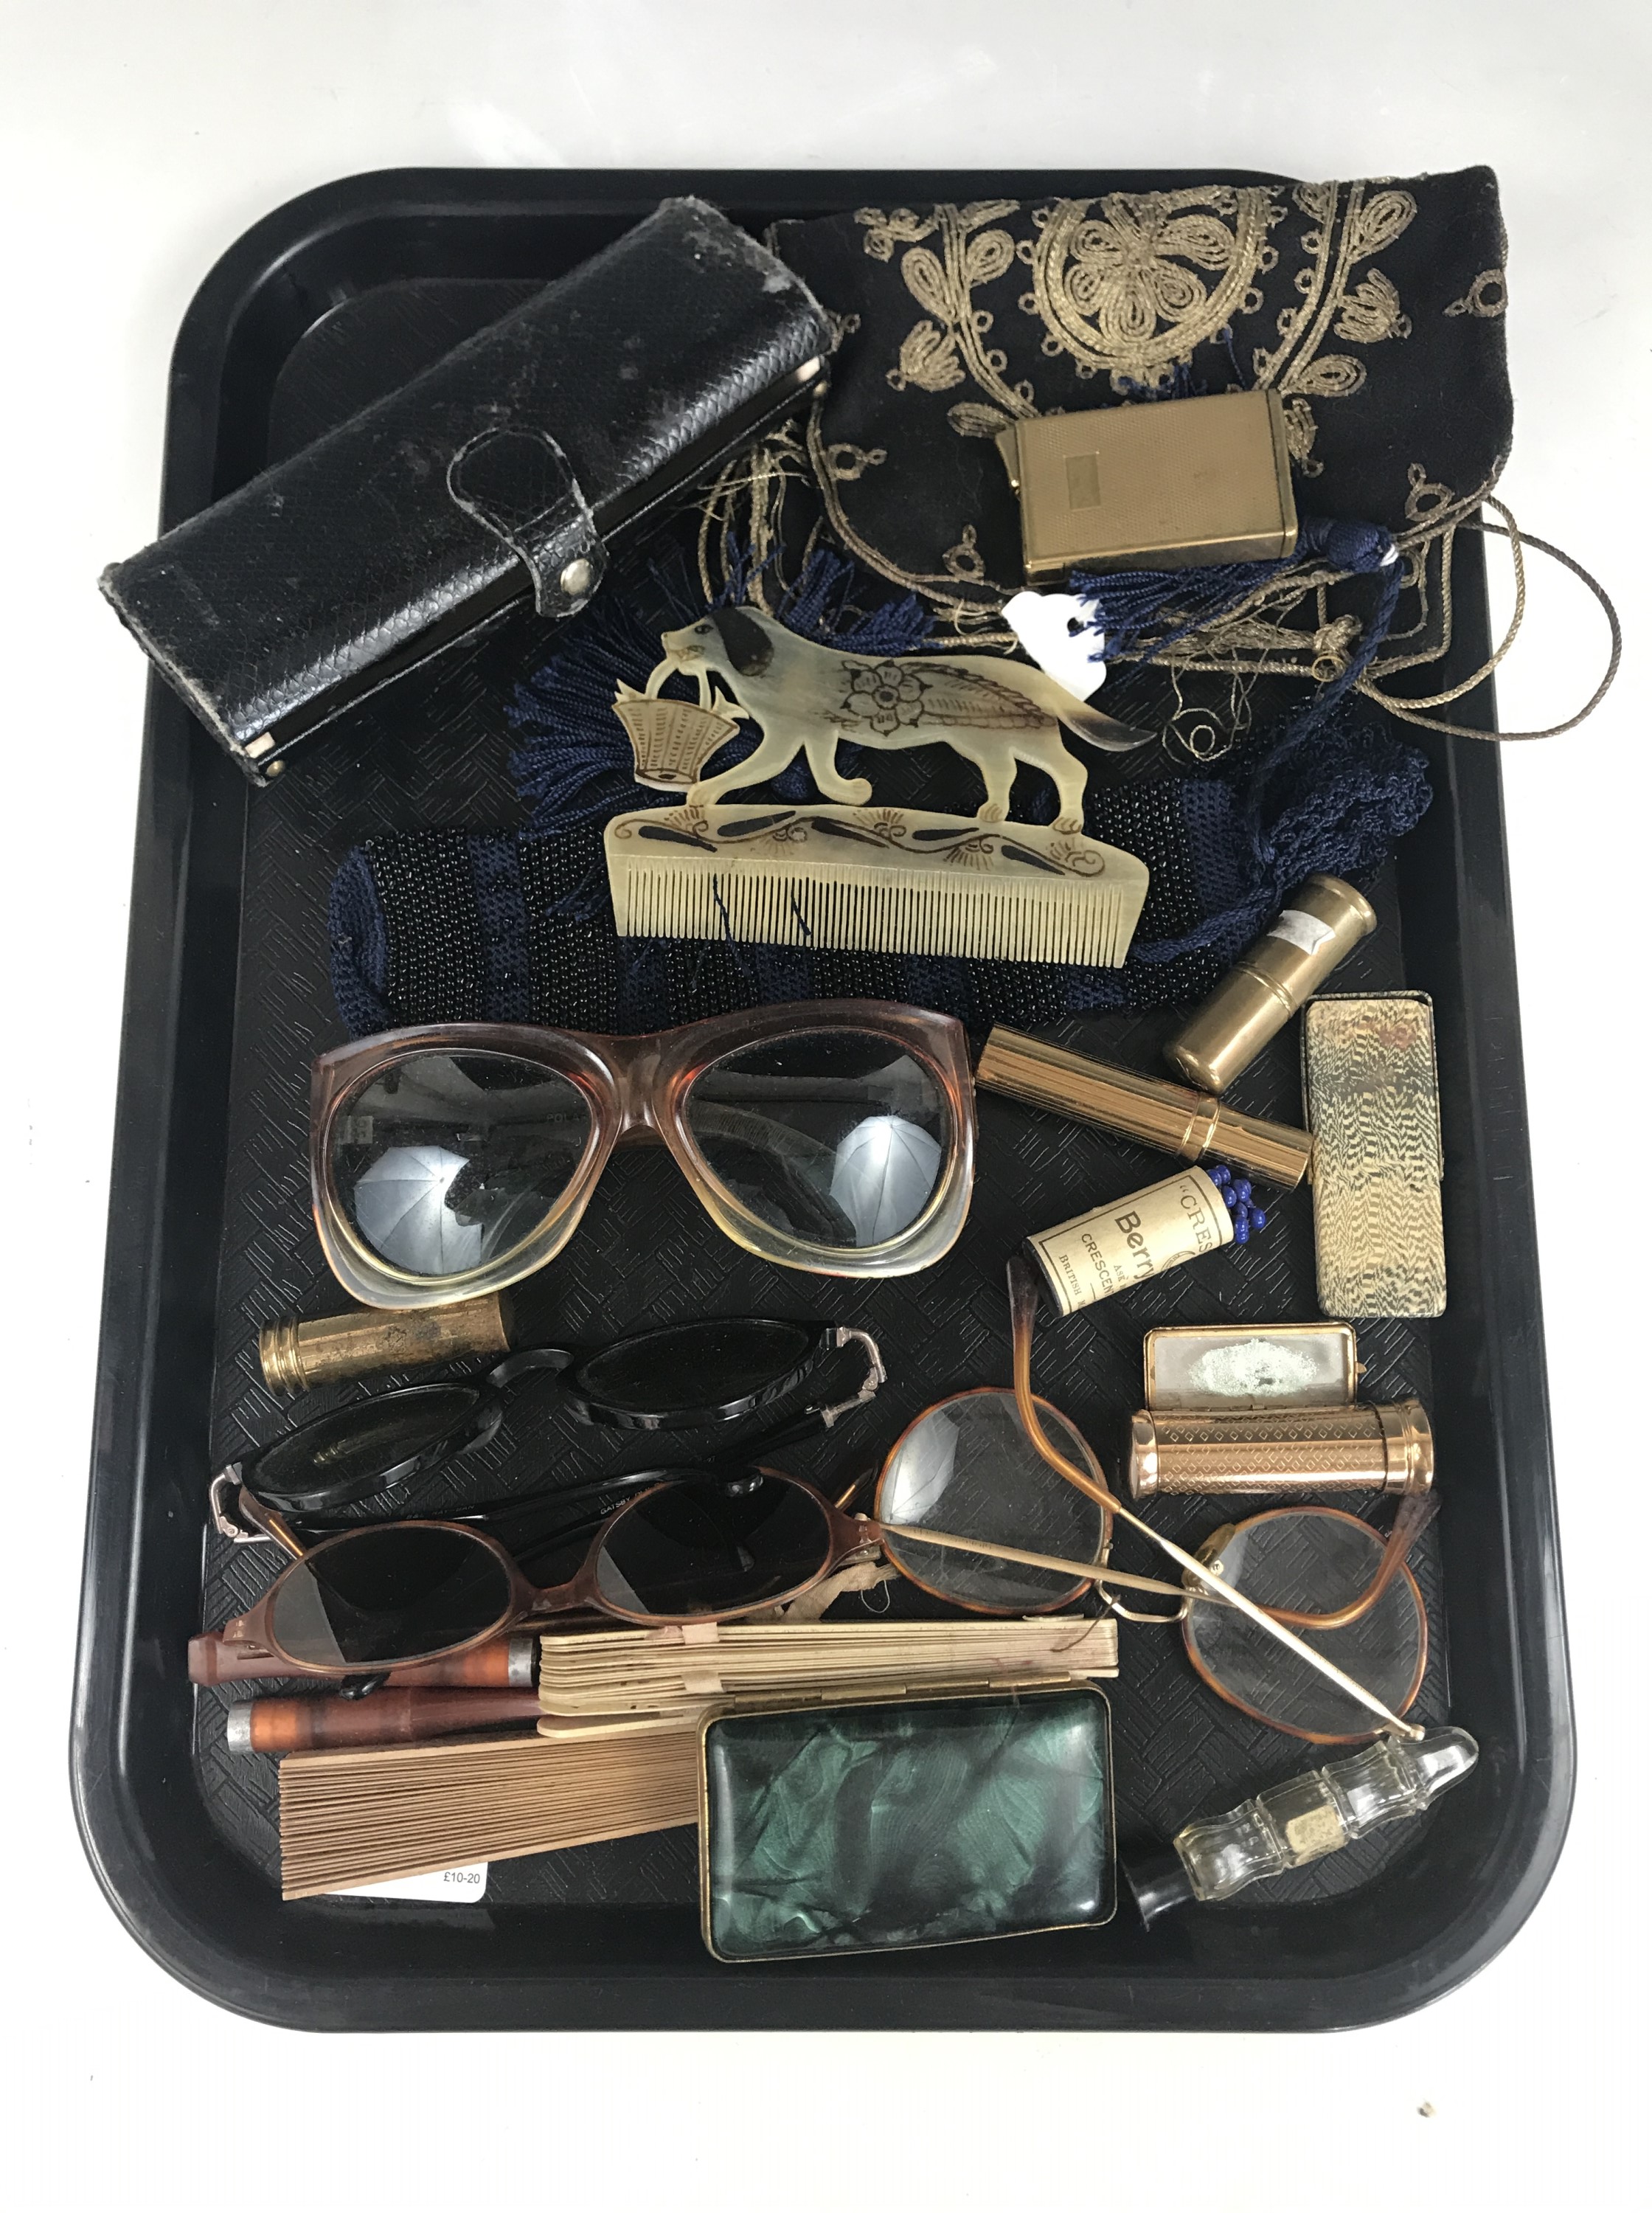 Vintage costume accessories including sunglasses, a reticule, vintage lipsticks and a horn comb